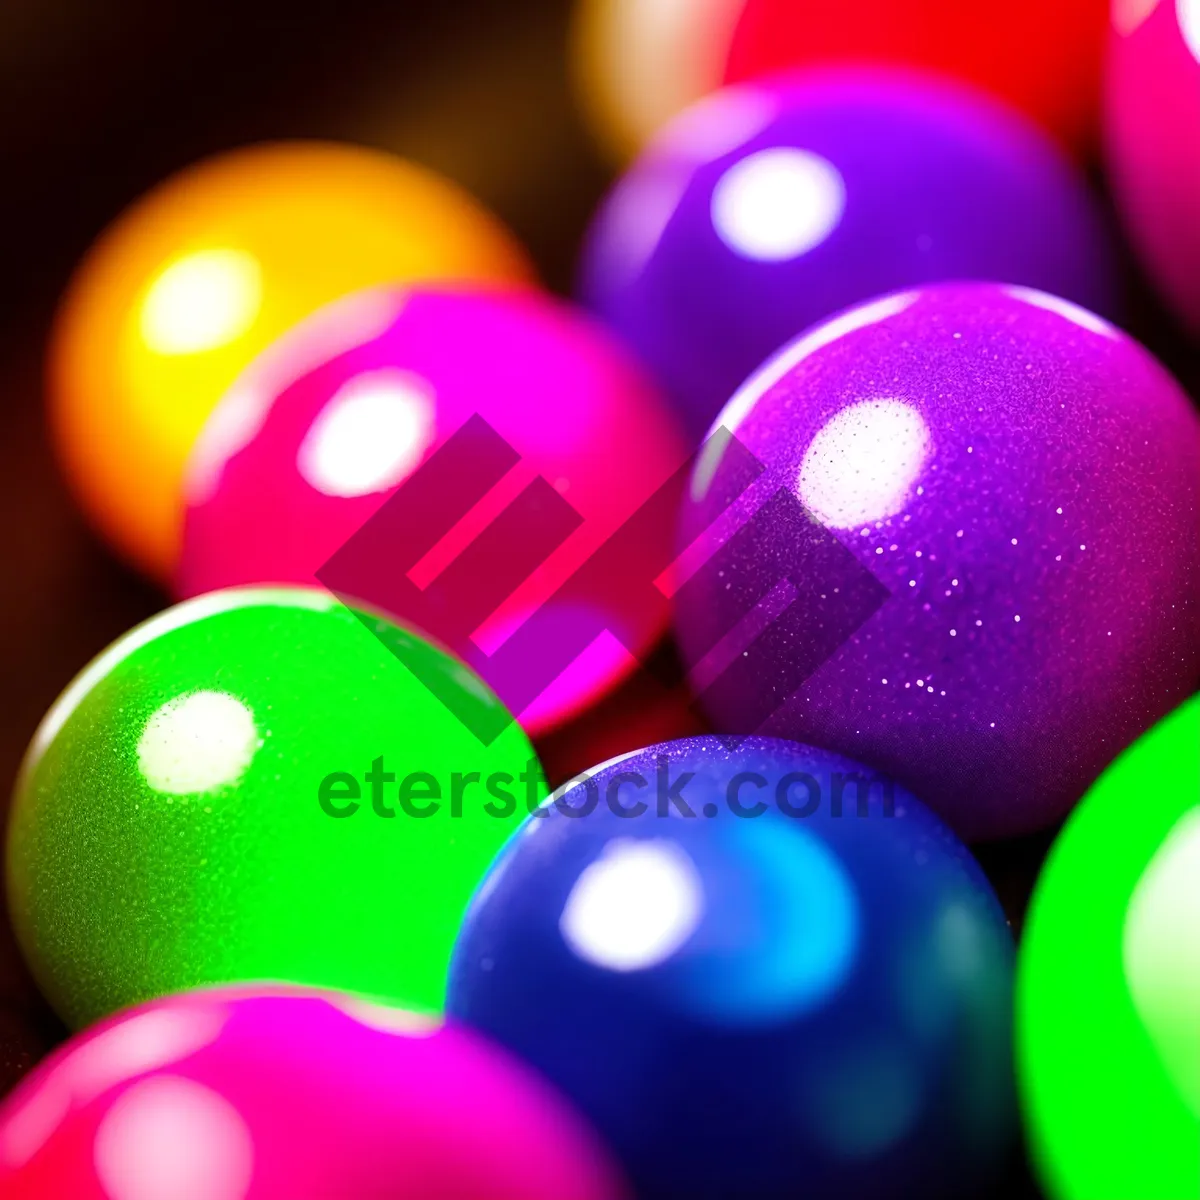 Picture of Colorful Polka Dot Billiard Ball on Shiny Table